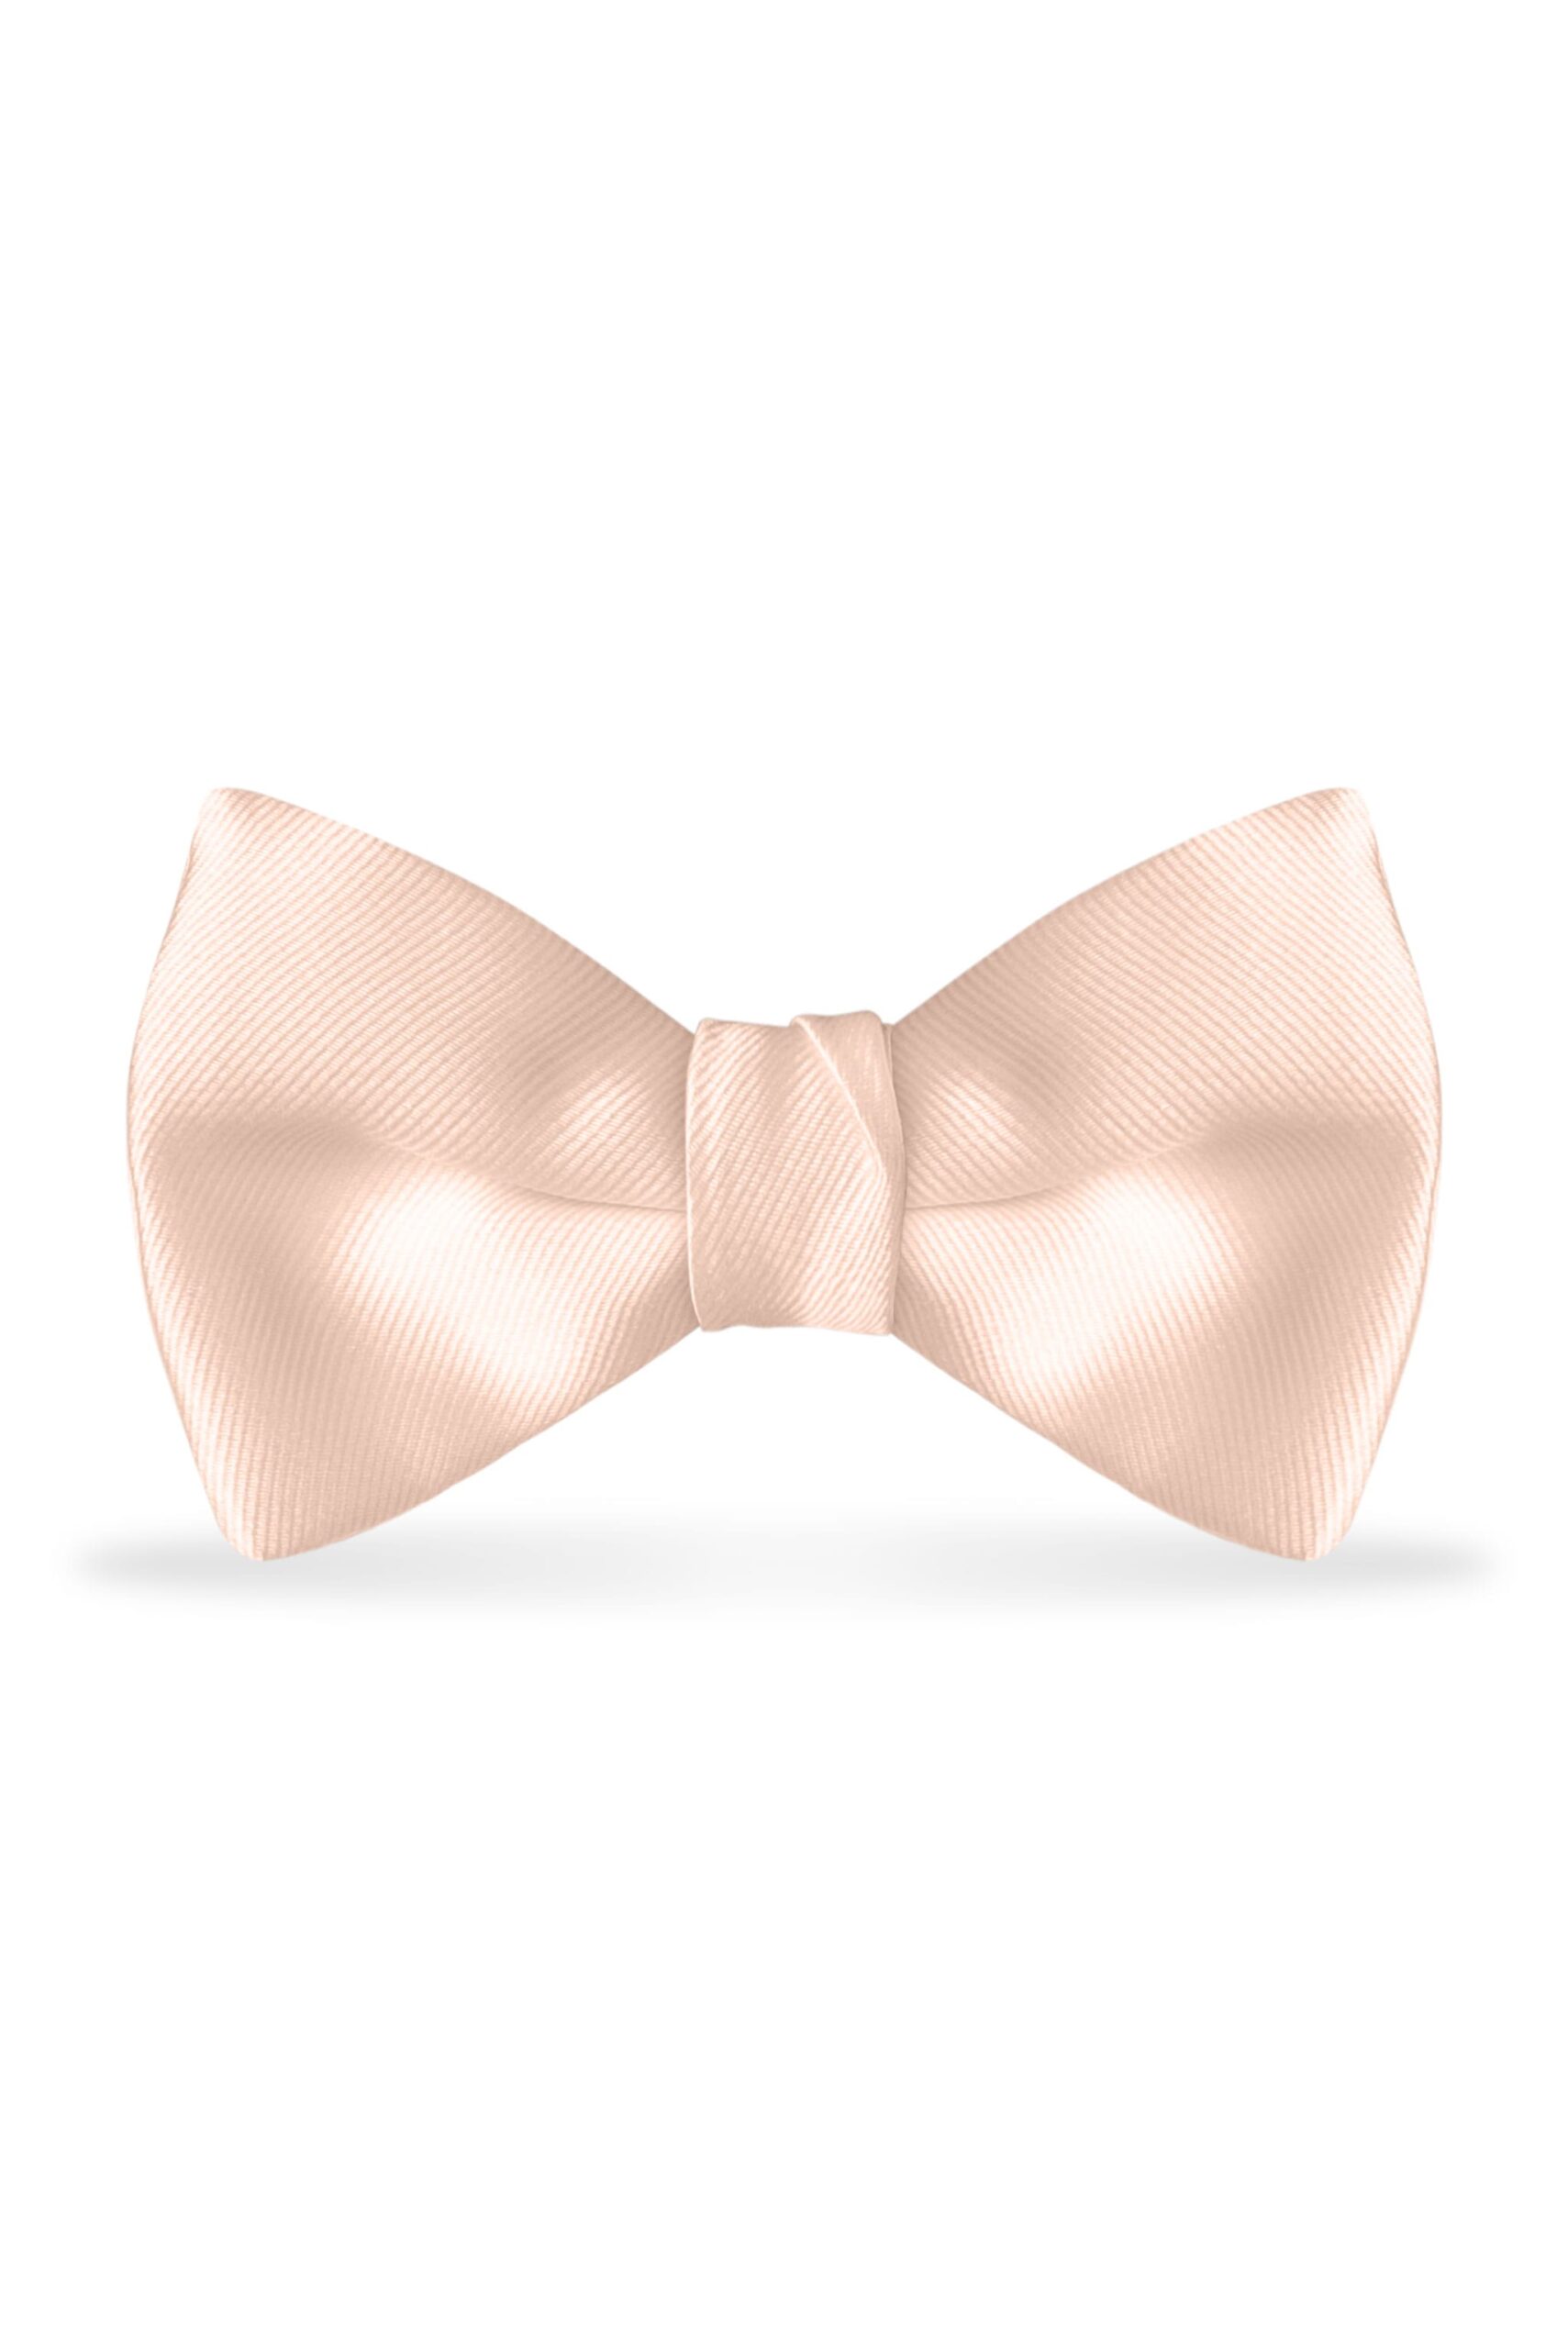 Solid Blush Bow Tie 1